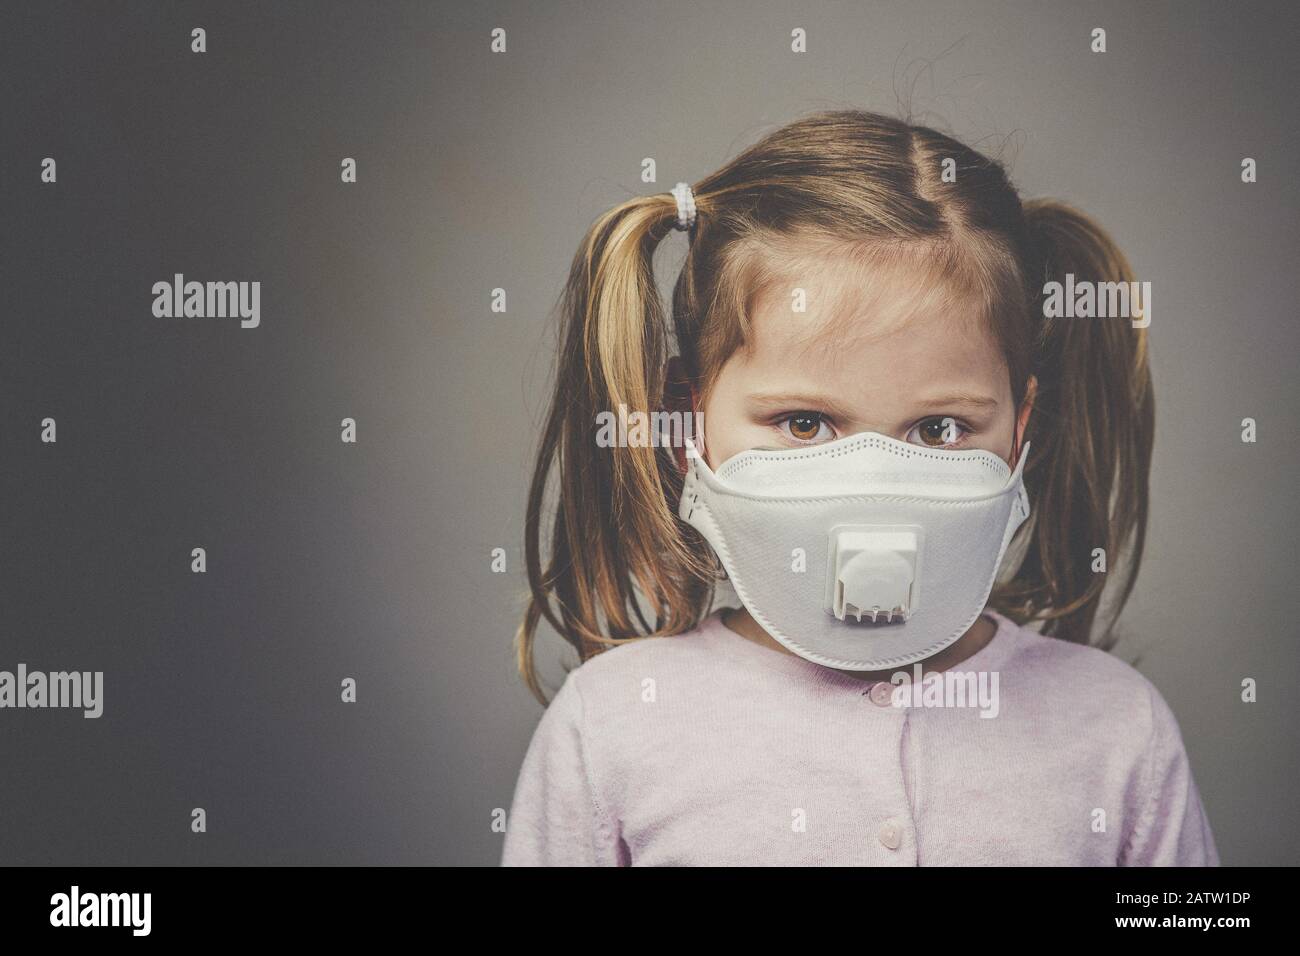 portrait of a girl with pigtails wearing a medical mask to protect herself from the crown virus infection. Stock Photo